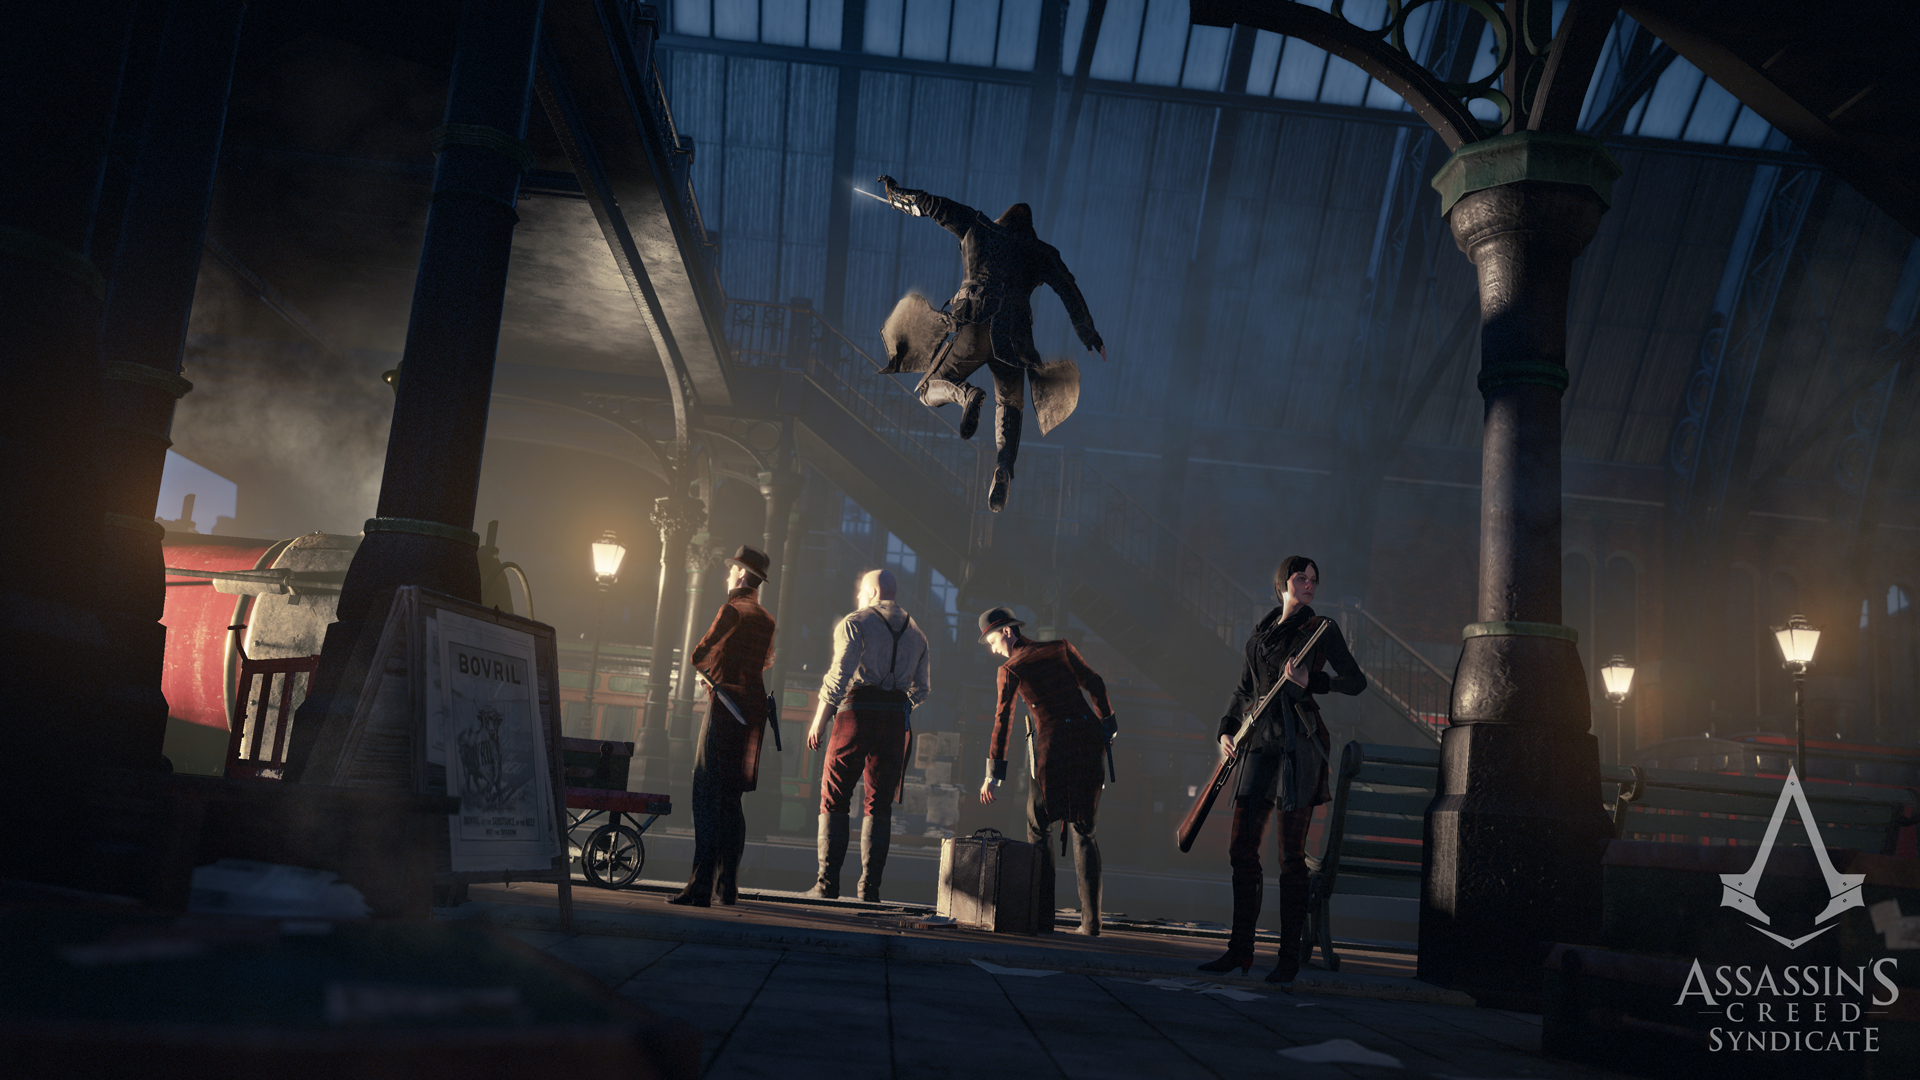 “Assassin’s Creed Syndicate” Will Include Microtransactions - Said to 